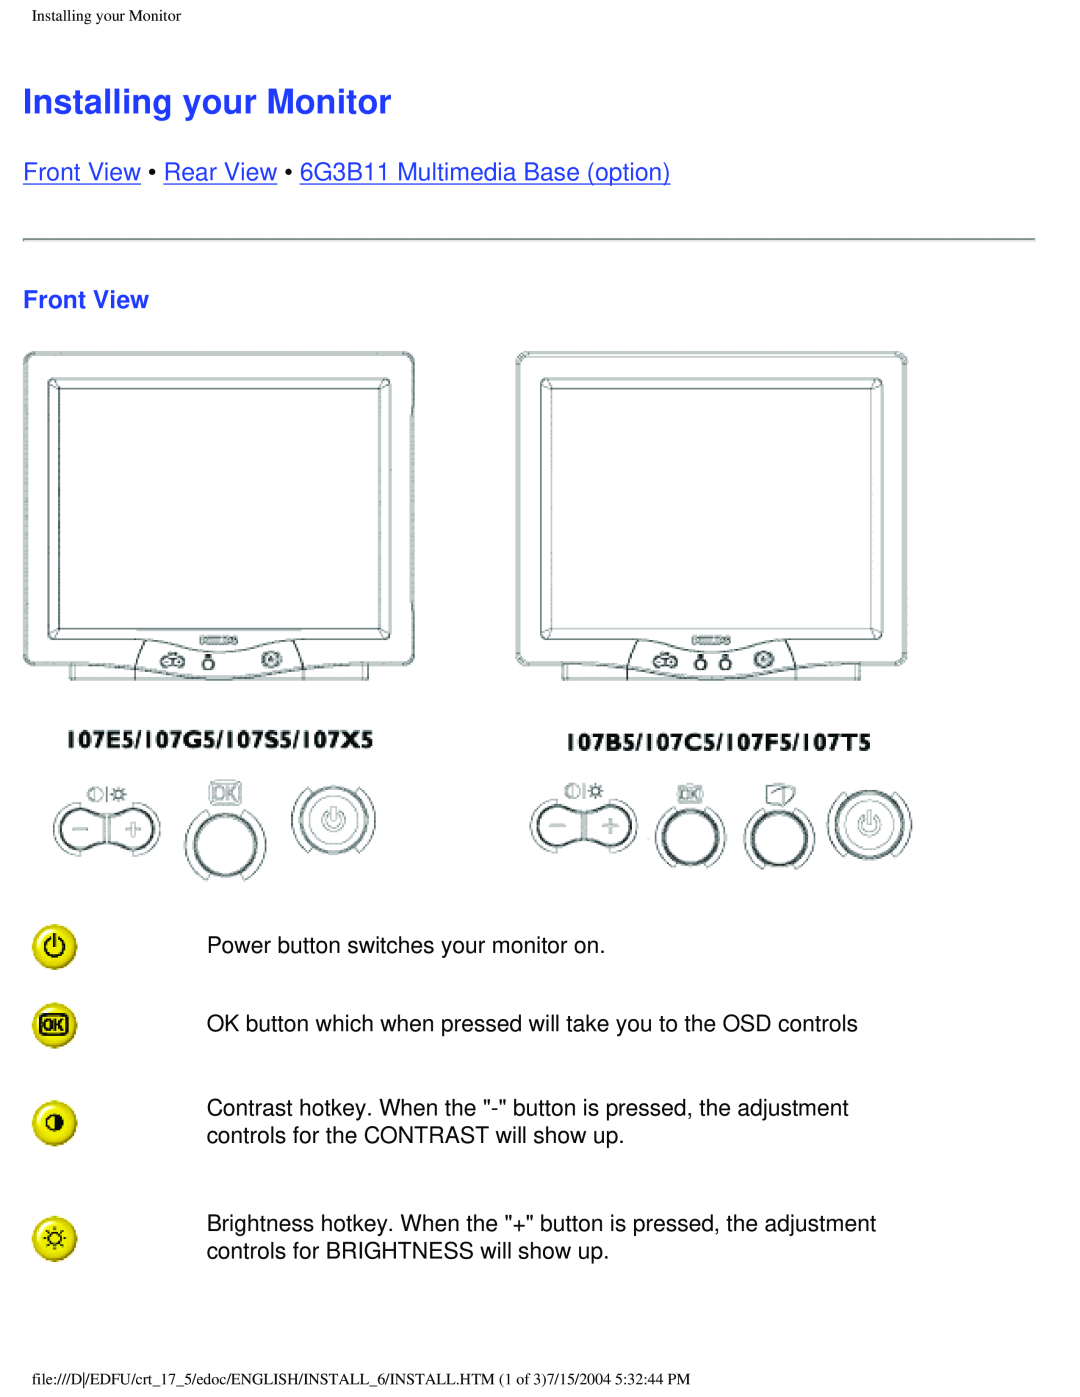 Philips 109F5, 107S5, 107T5, 109B5, 107F5, 107E5 user manual Installing your Monitor, Front View 